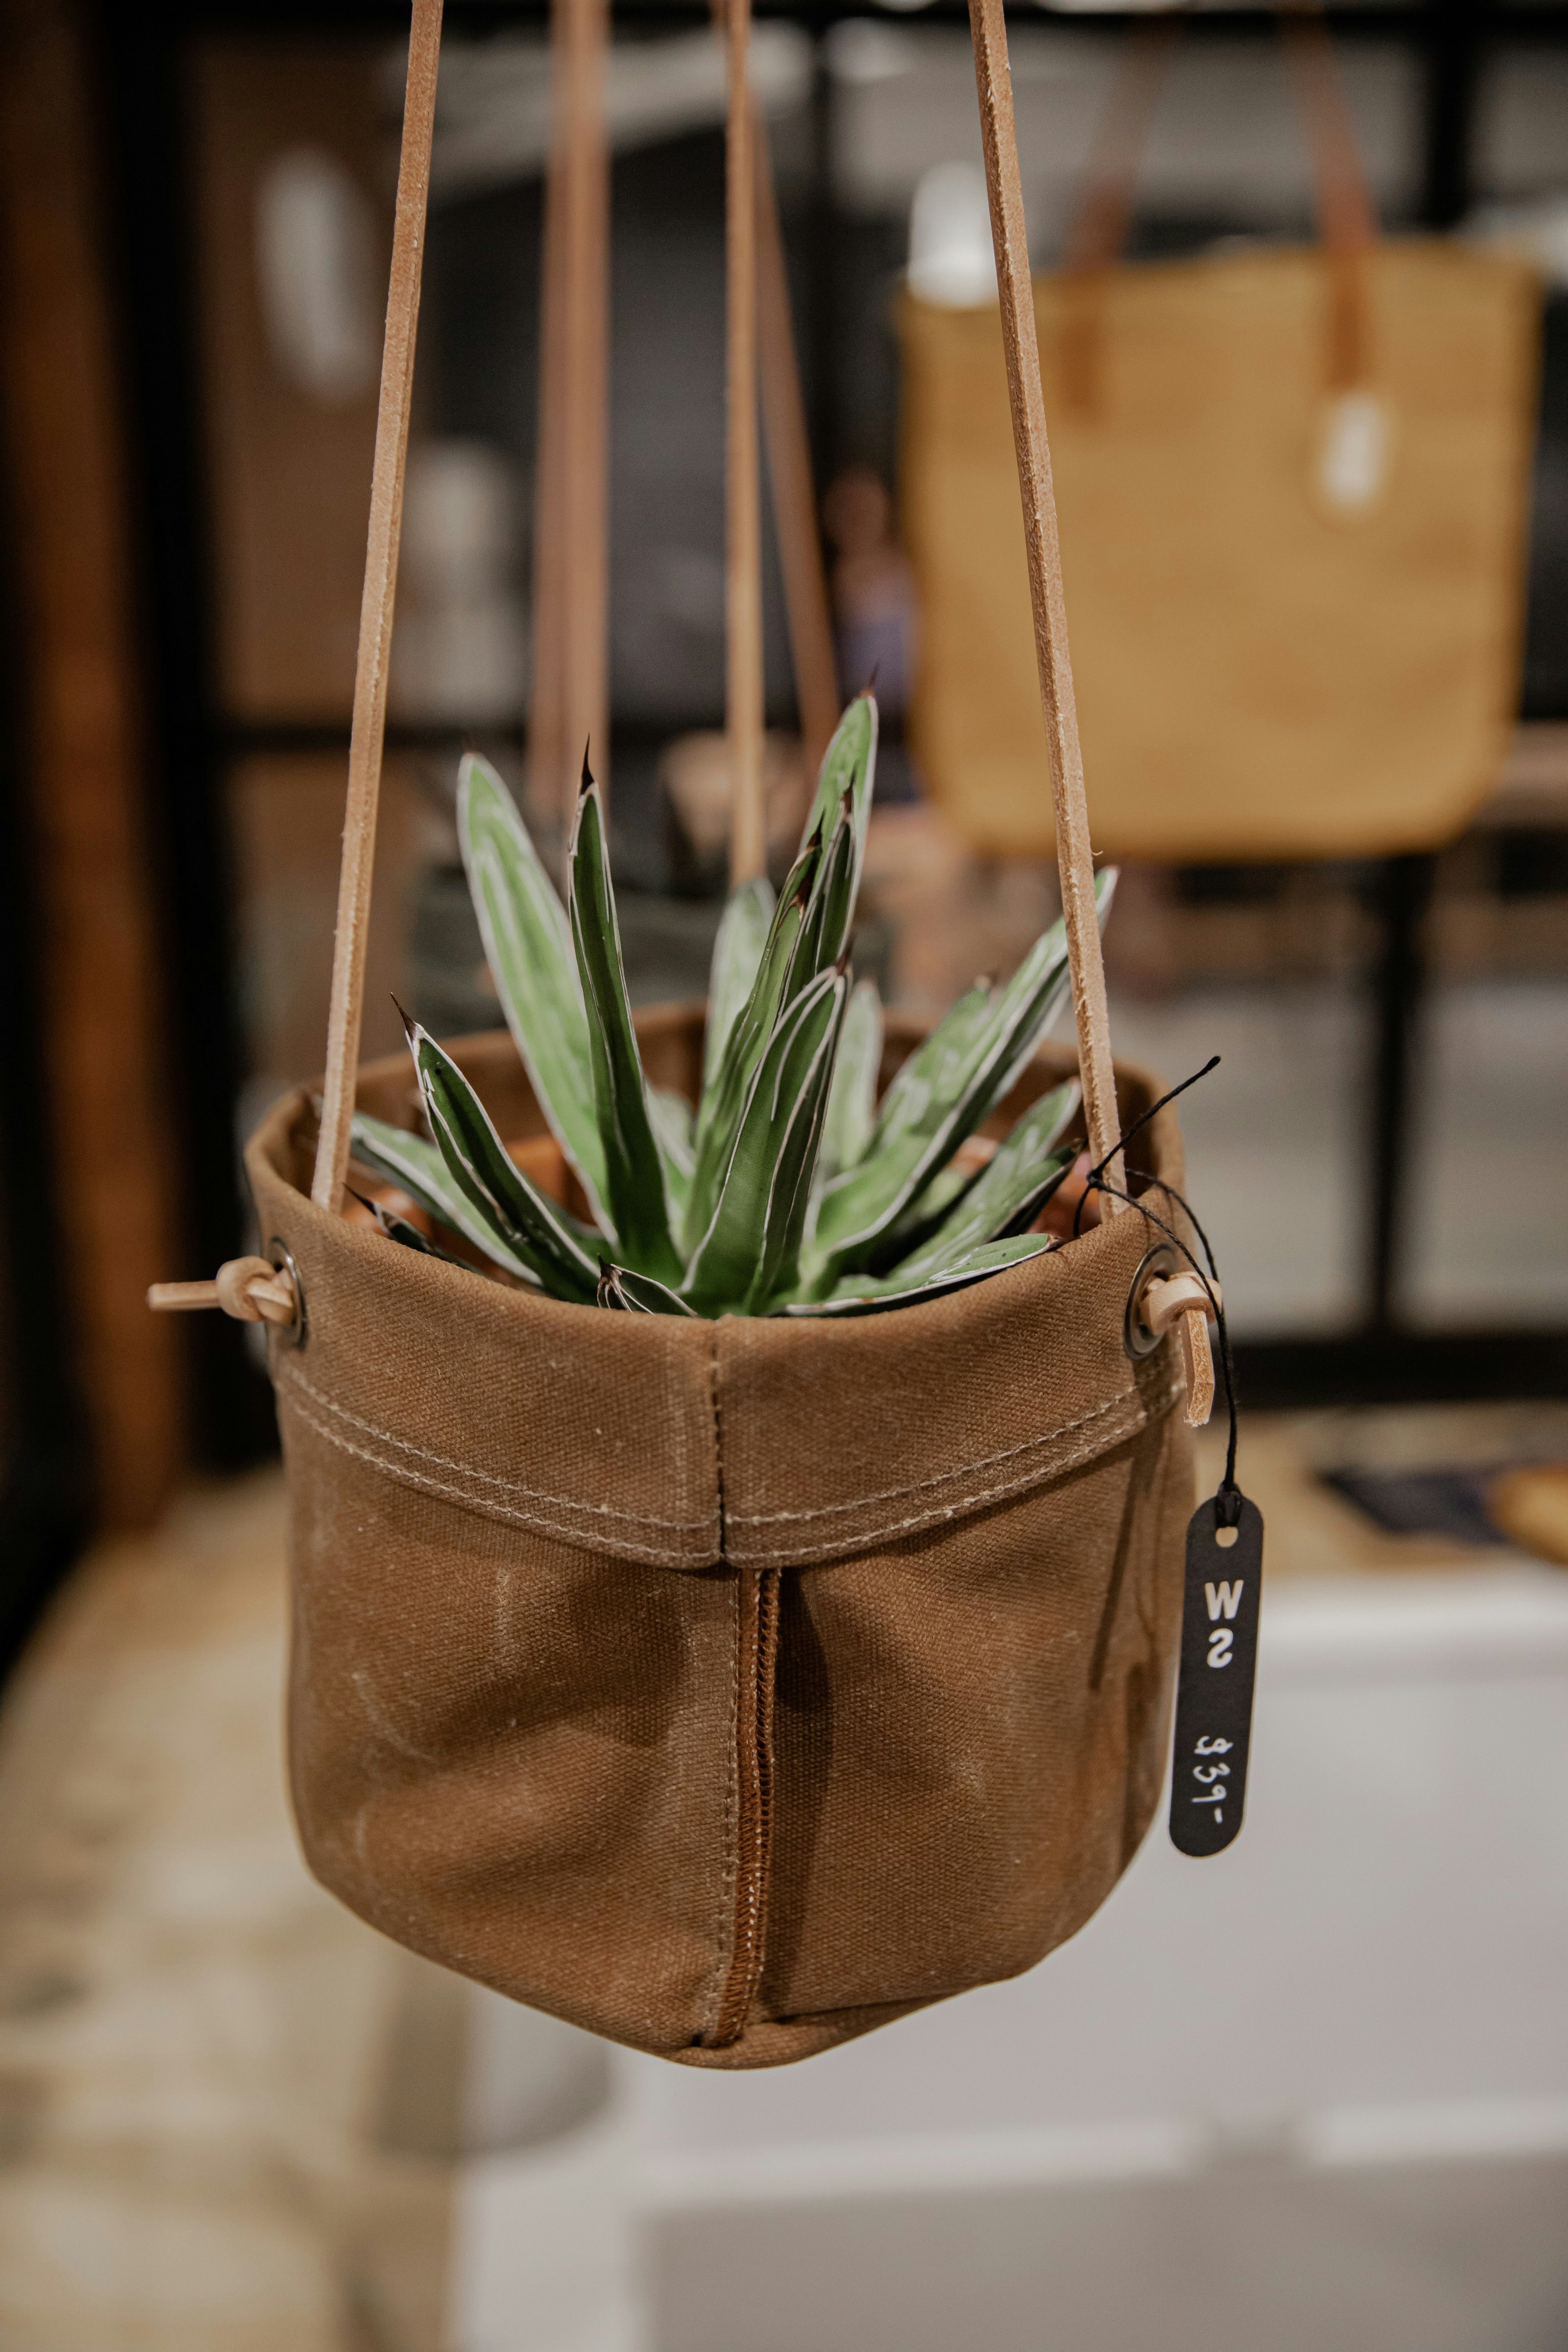 green plant on brown leather bag